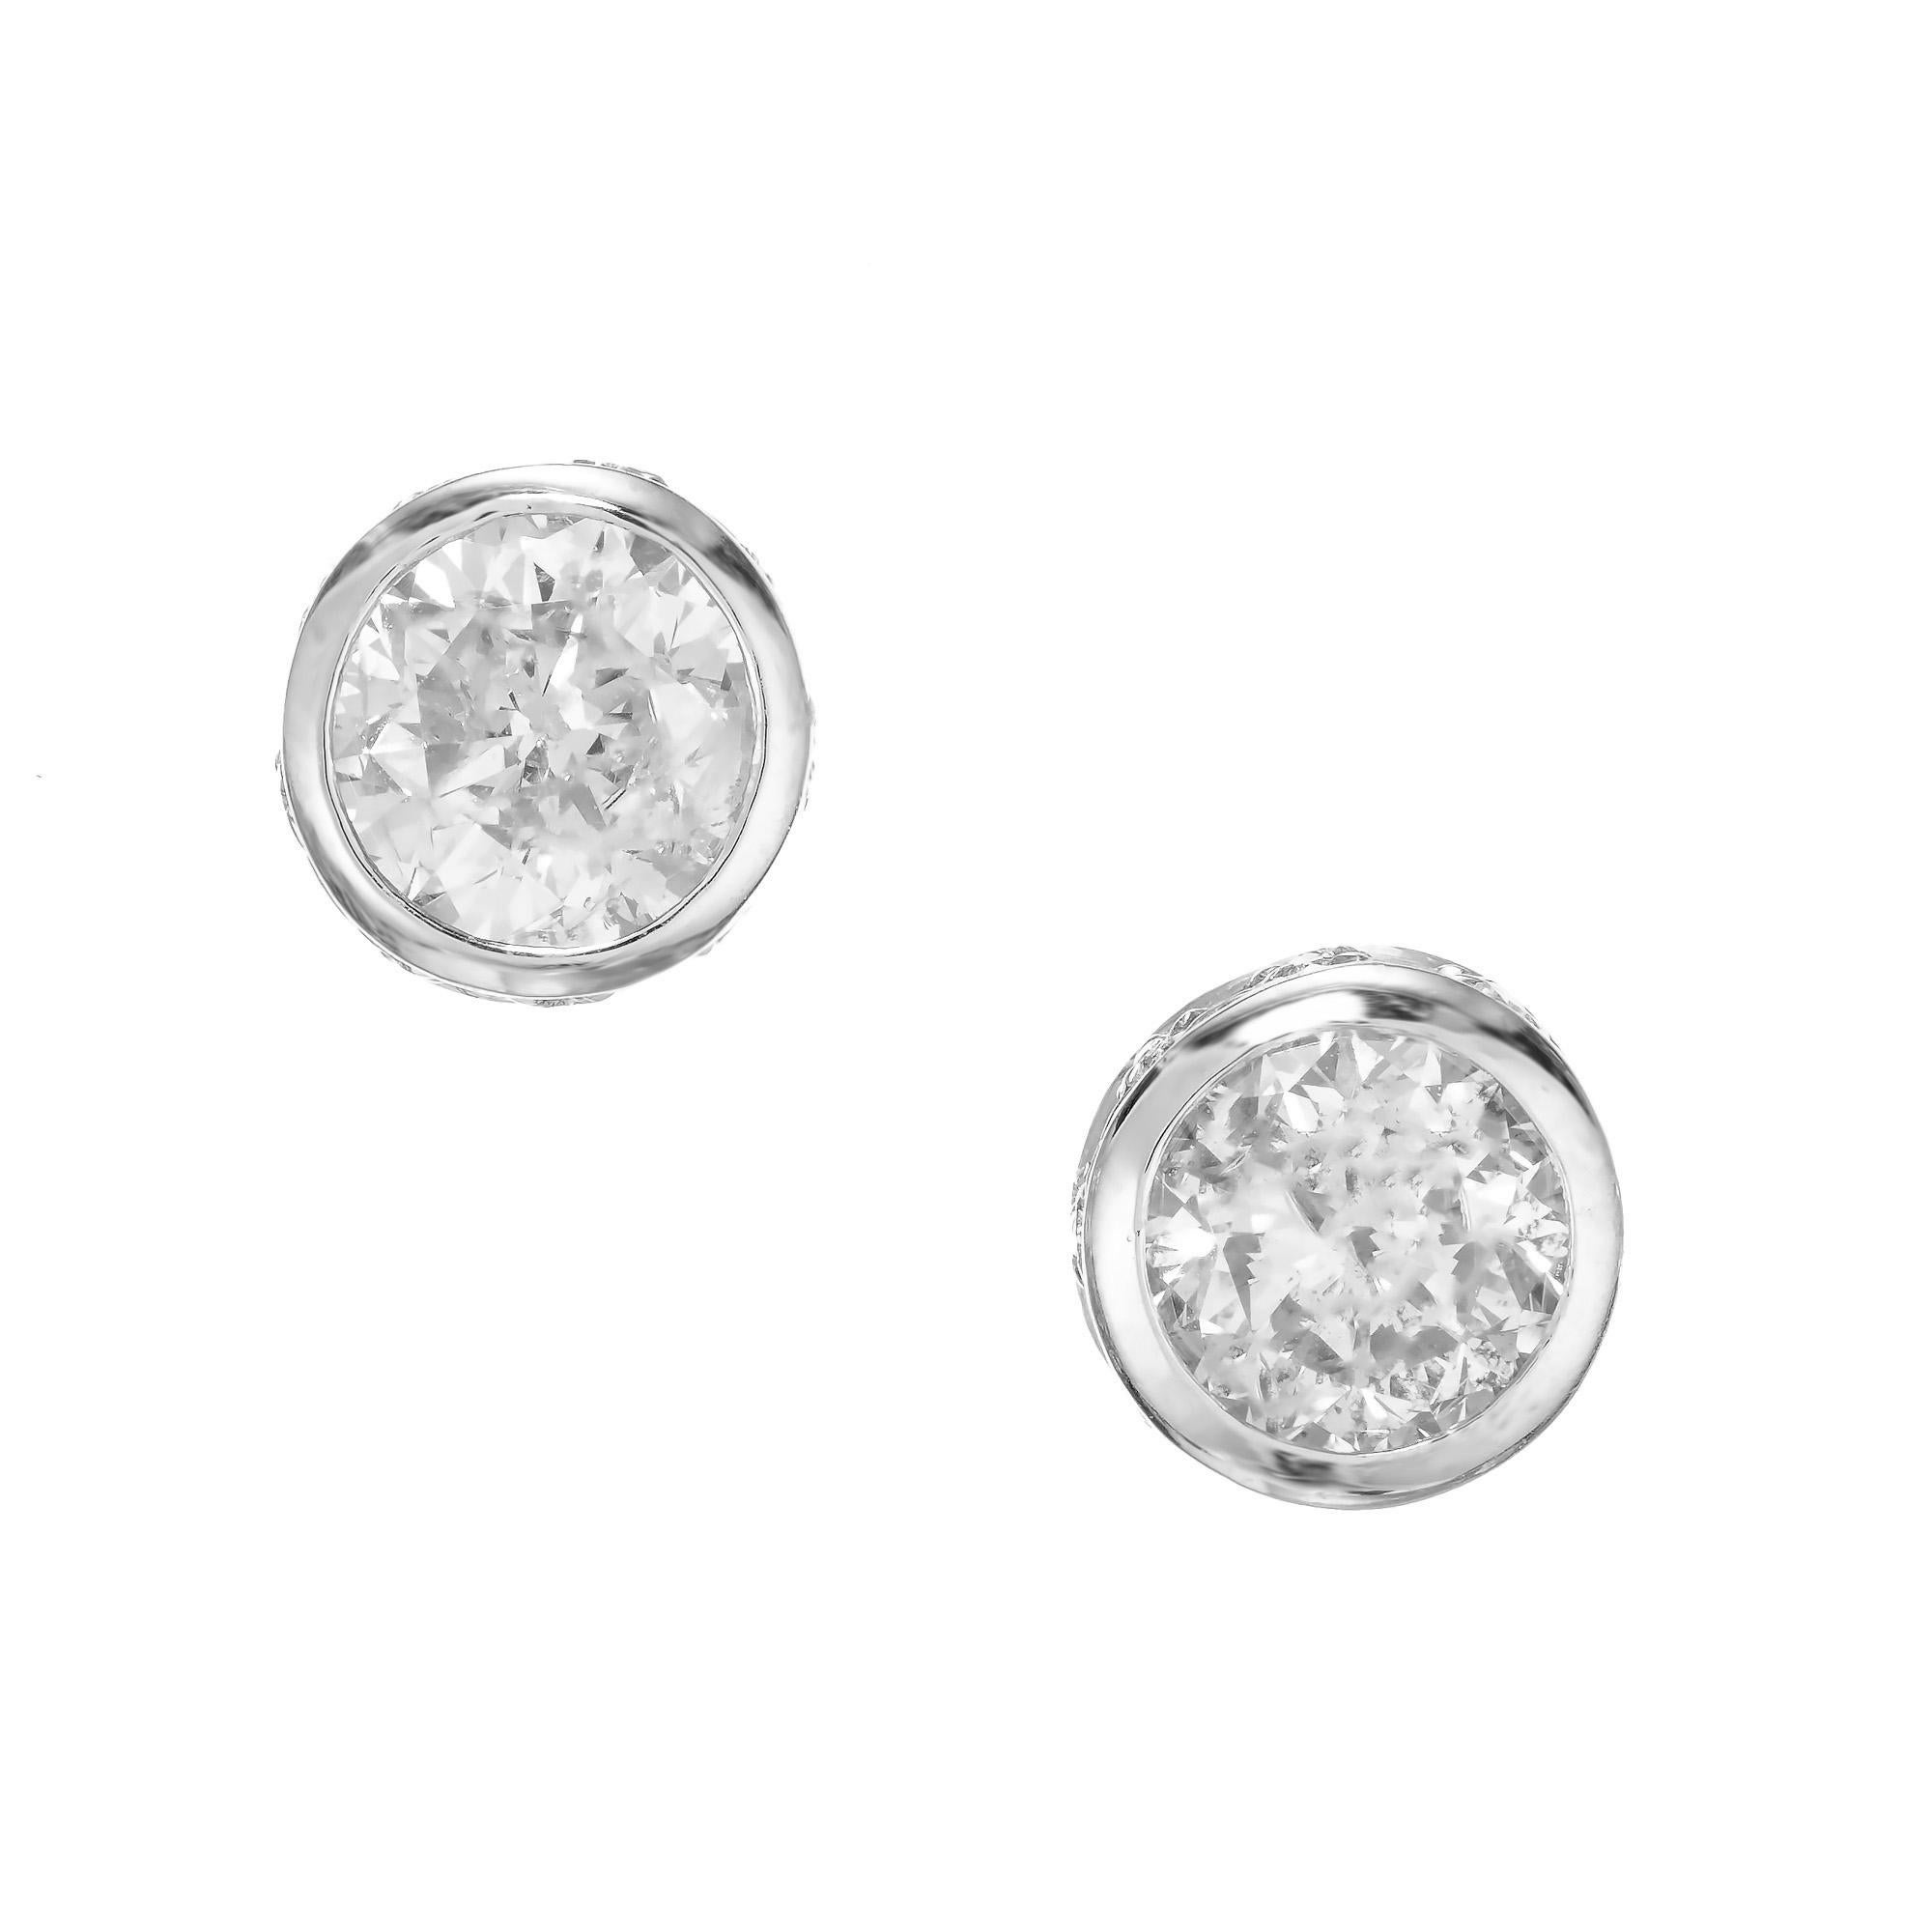 Bezel set diamond stud earrings. 2 round brilliant cut diamonds totaling 1.00cts bezel set in platinum settings with 18 round cut accent diamonds along the sides.

2 round brilliant cut diamonds, approx. total weight: 1.00cts  J-I1
18 round